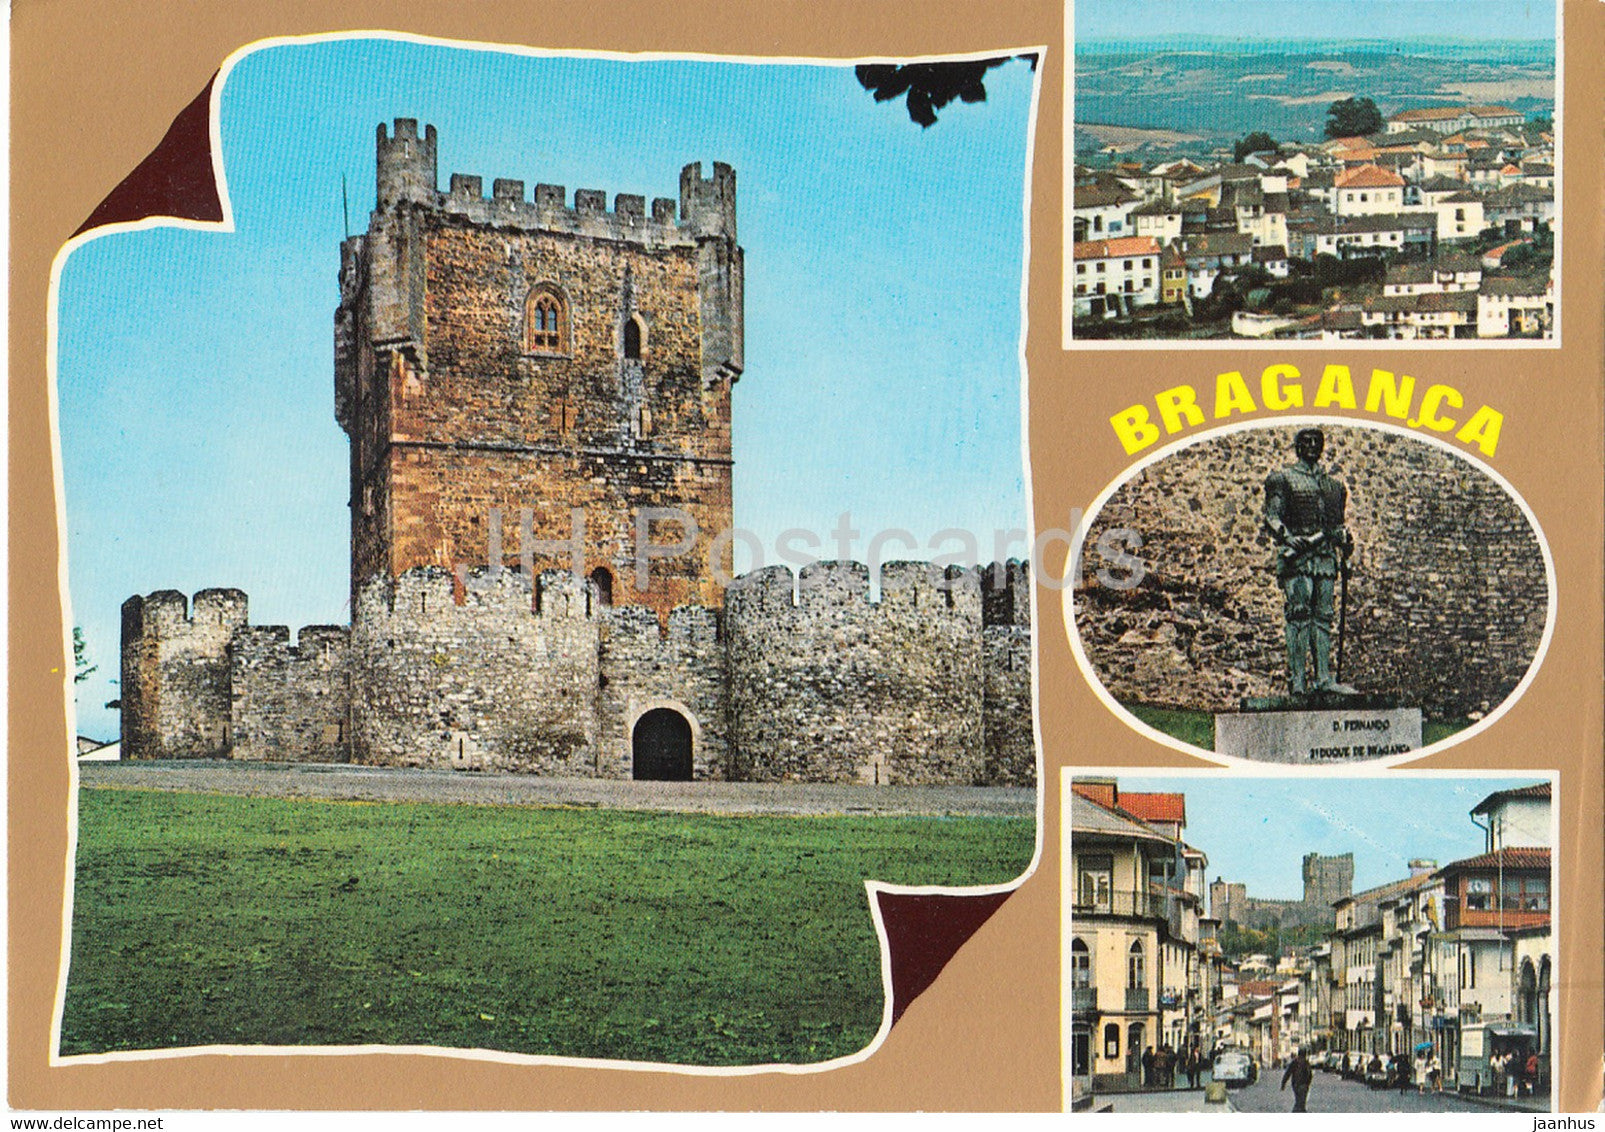 Braganca - Town with many monuments and thermal places - multiview - Portugal - unused - JH Postcards